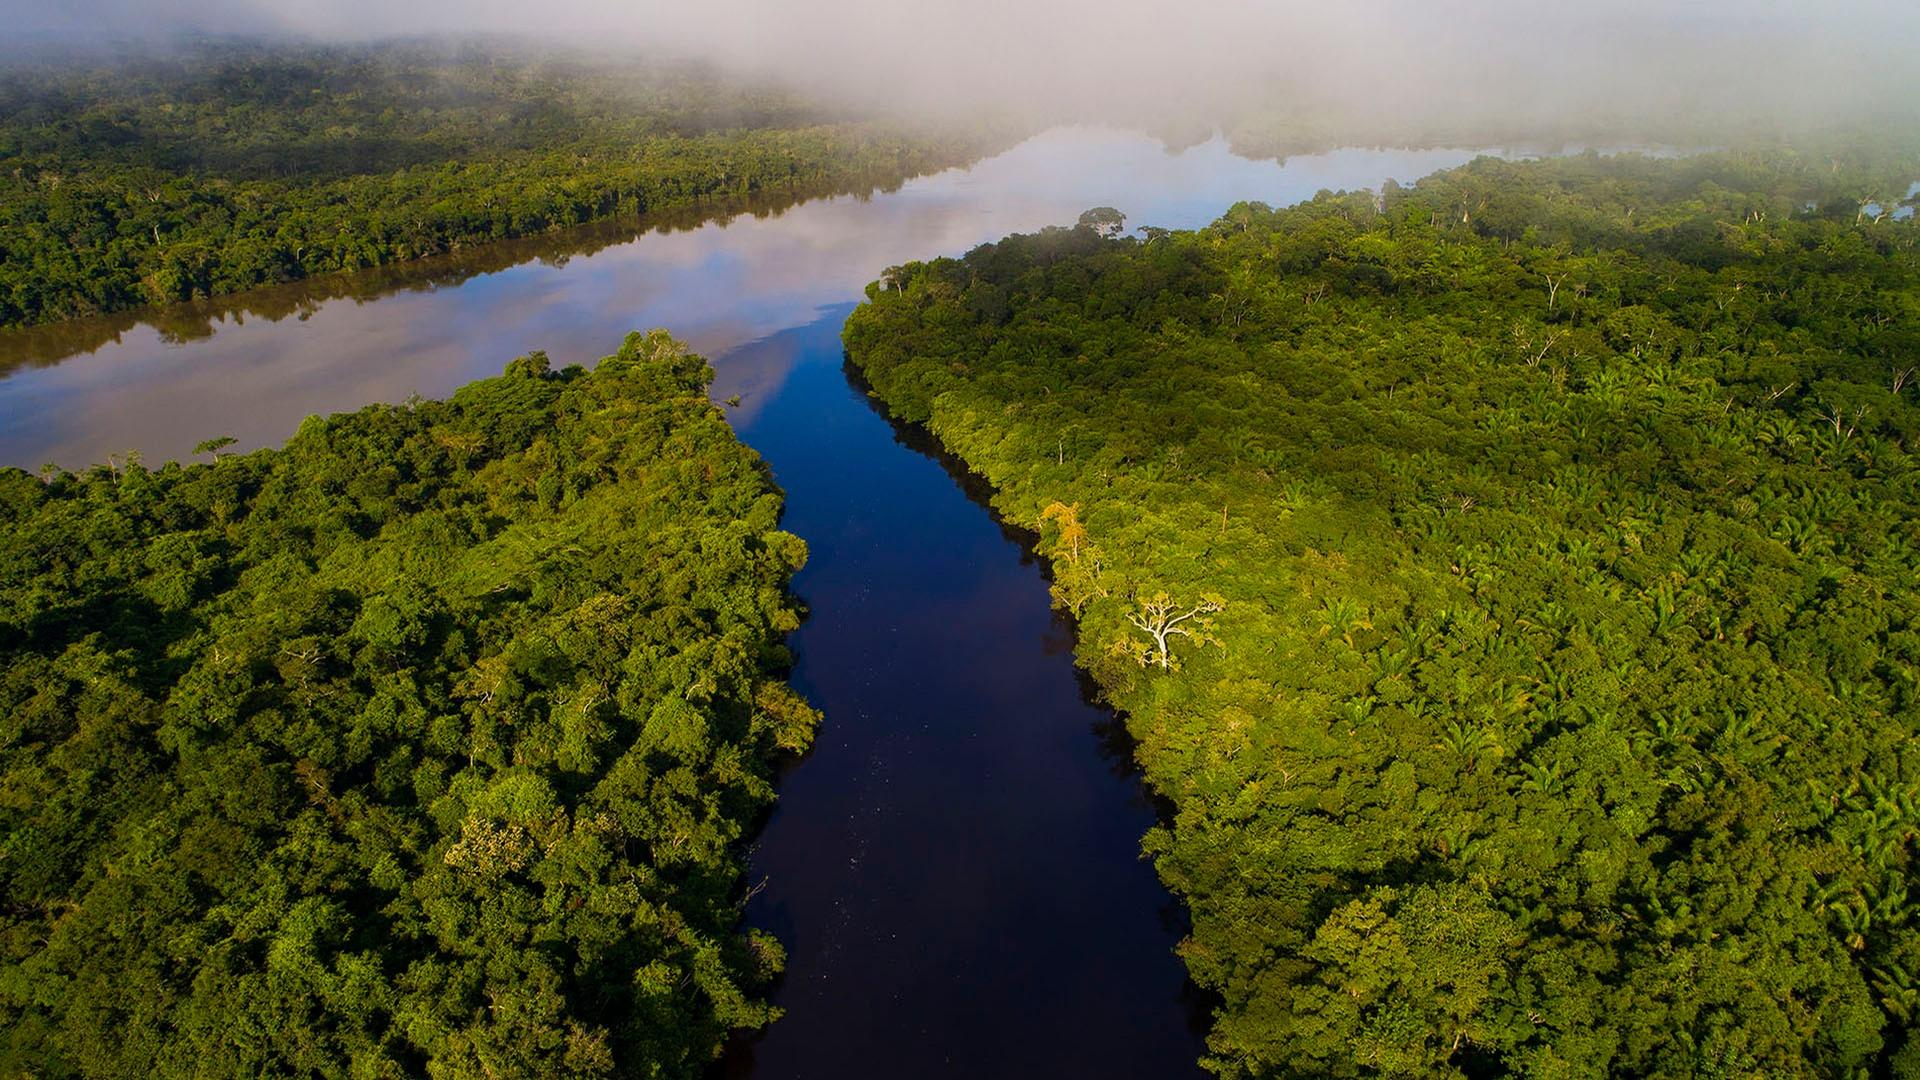 a case study on life in amazon river basin